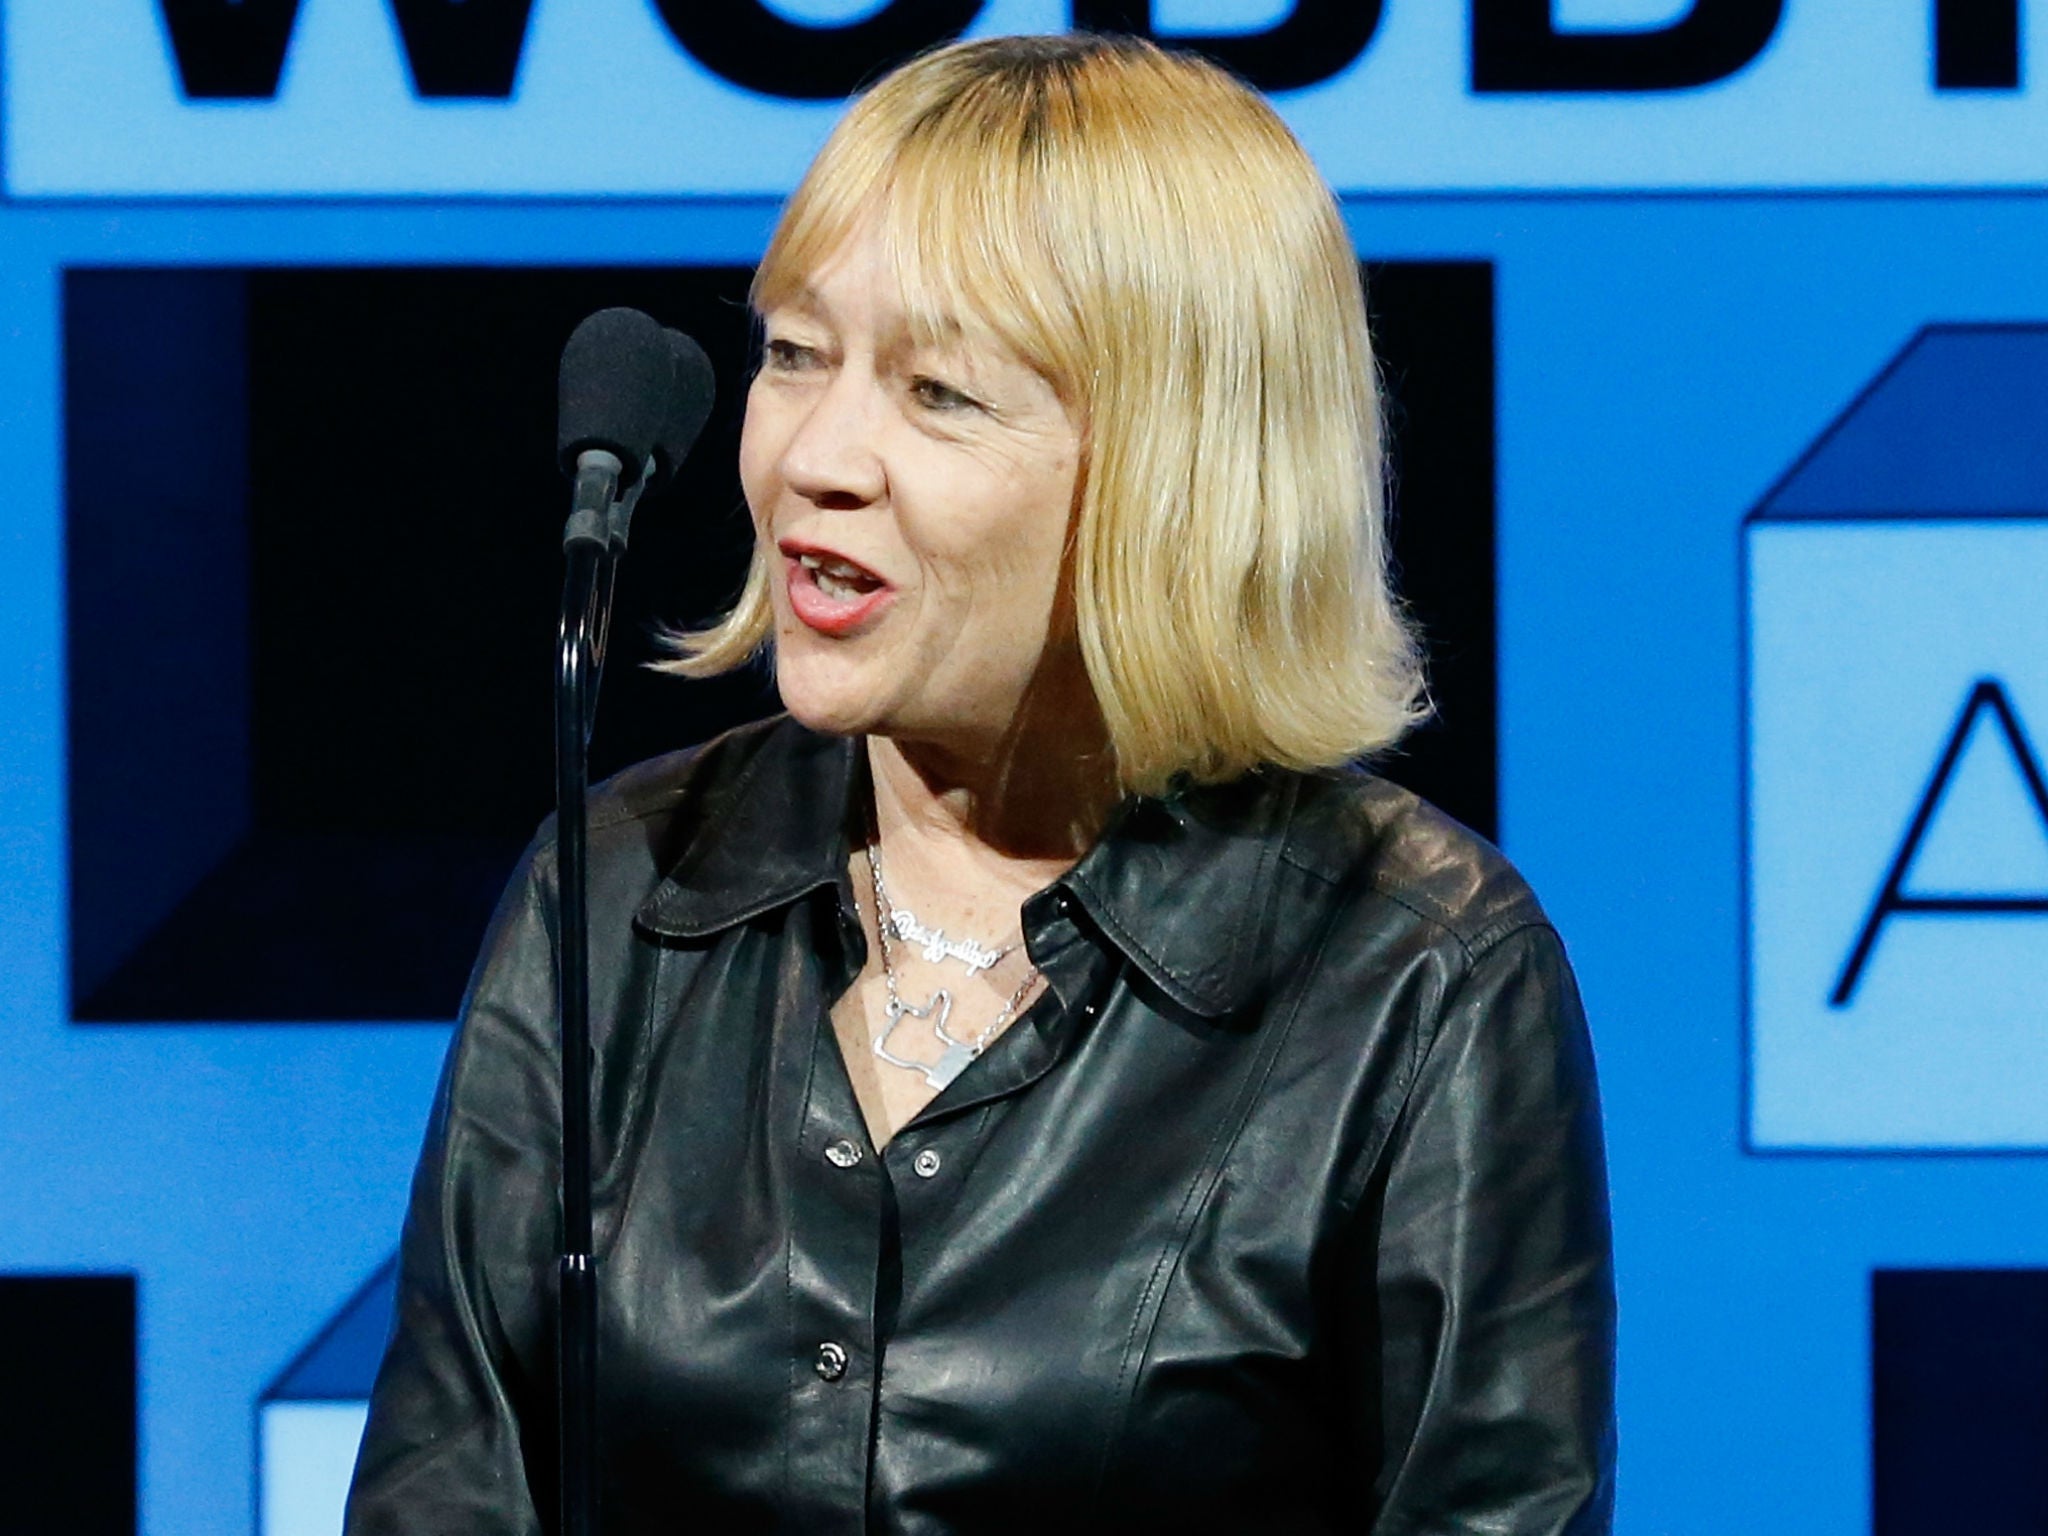 Cindy Gallop, founder of Make Love Not Porn